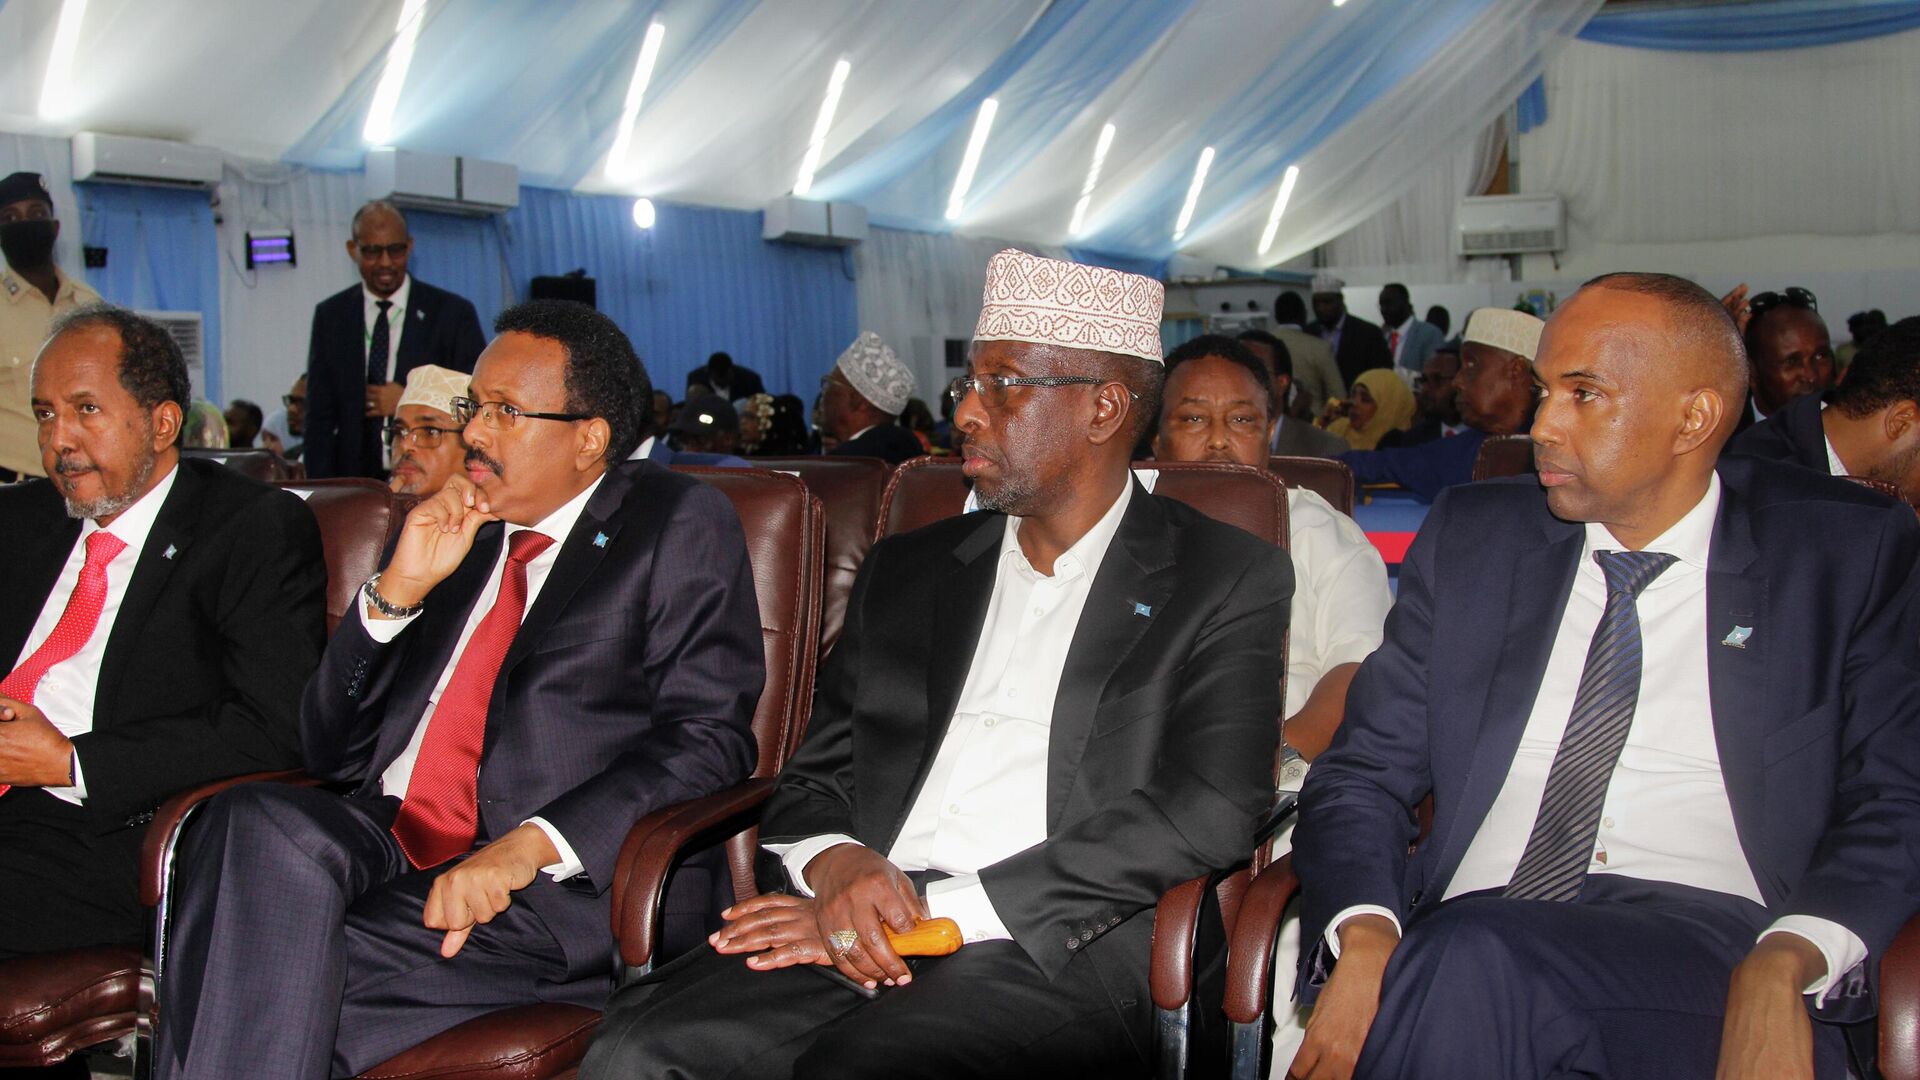 From left to right, former president Hassan Sheikh Mohamud, incumbent leader Mohamed Abdullahi Mohamed, former president Sharif Sheikh Ahmed, and former prime minister Hassan Ali Khaire, attend a voting session for the presidential election, at the Halane military camp which is protected by African Union peacekeepers, in Mogadishu, Somalia Sunday, May 15, 2022. - Sputnik International, 1920, 15.05.2022